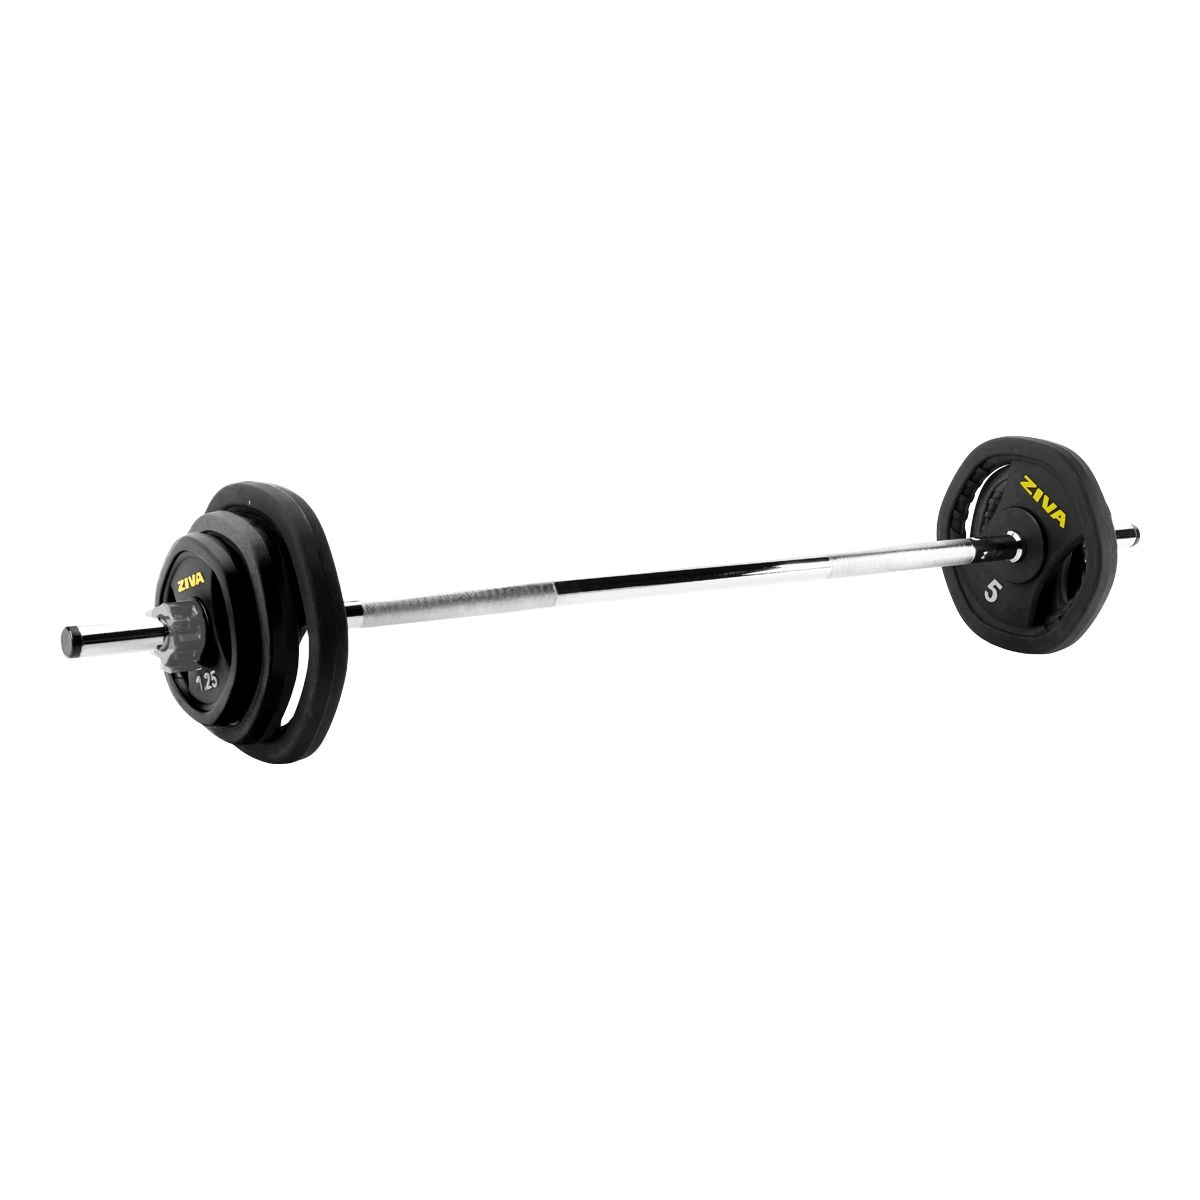 Image of Ziva Perfromance 5' Chrome Barbell Weight Home Gym